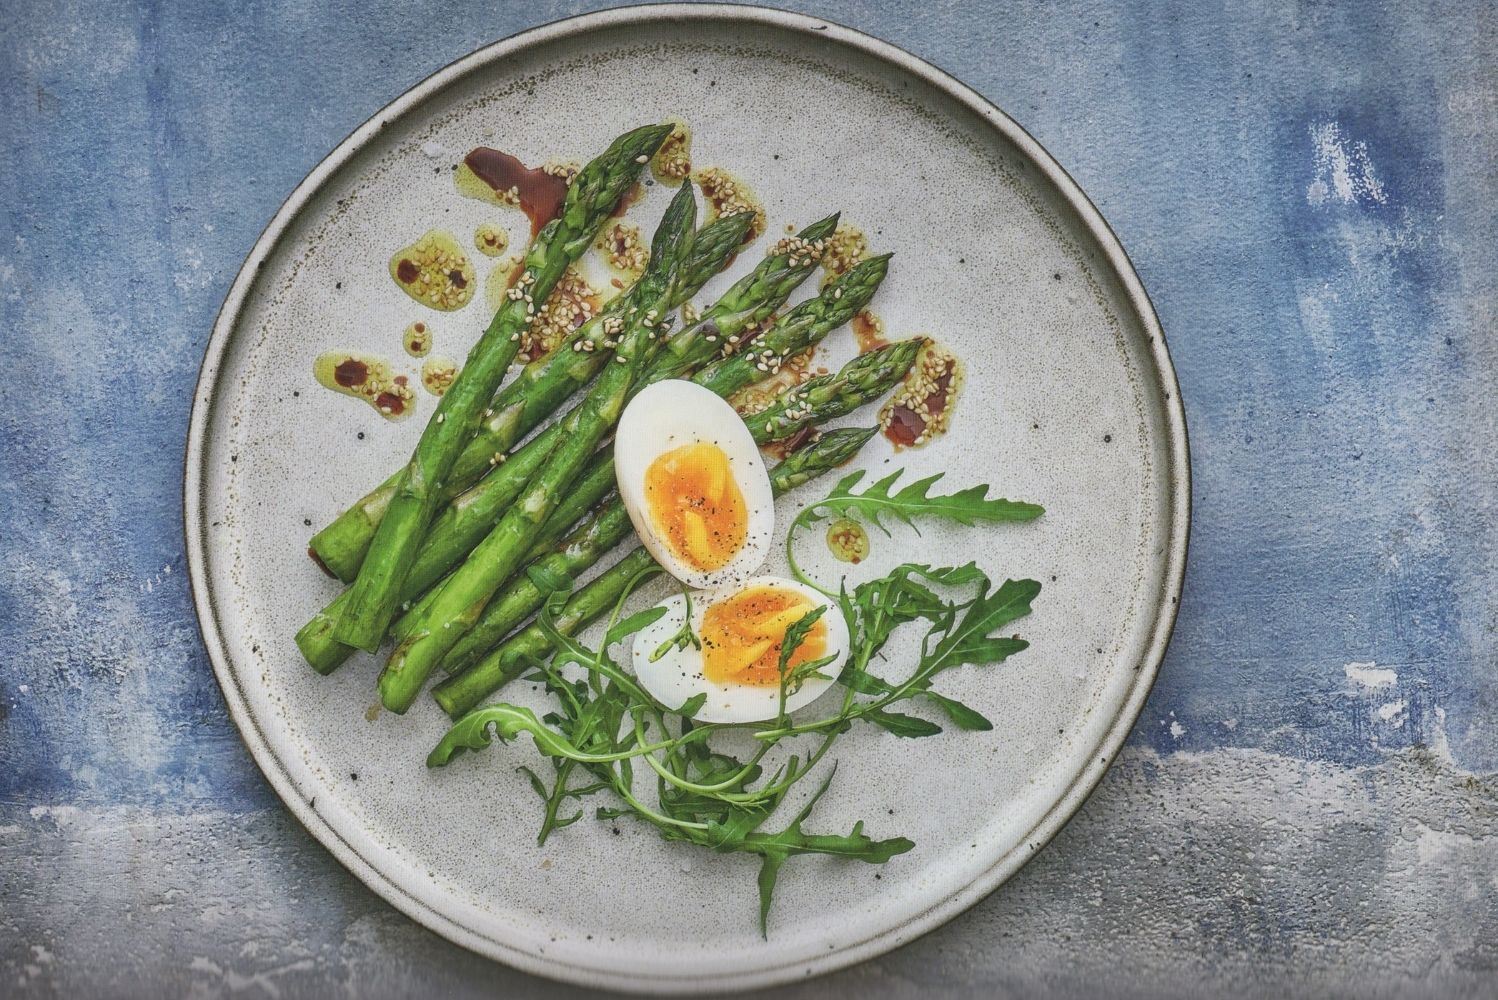 A plate with asparagus and eggs